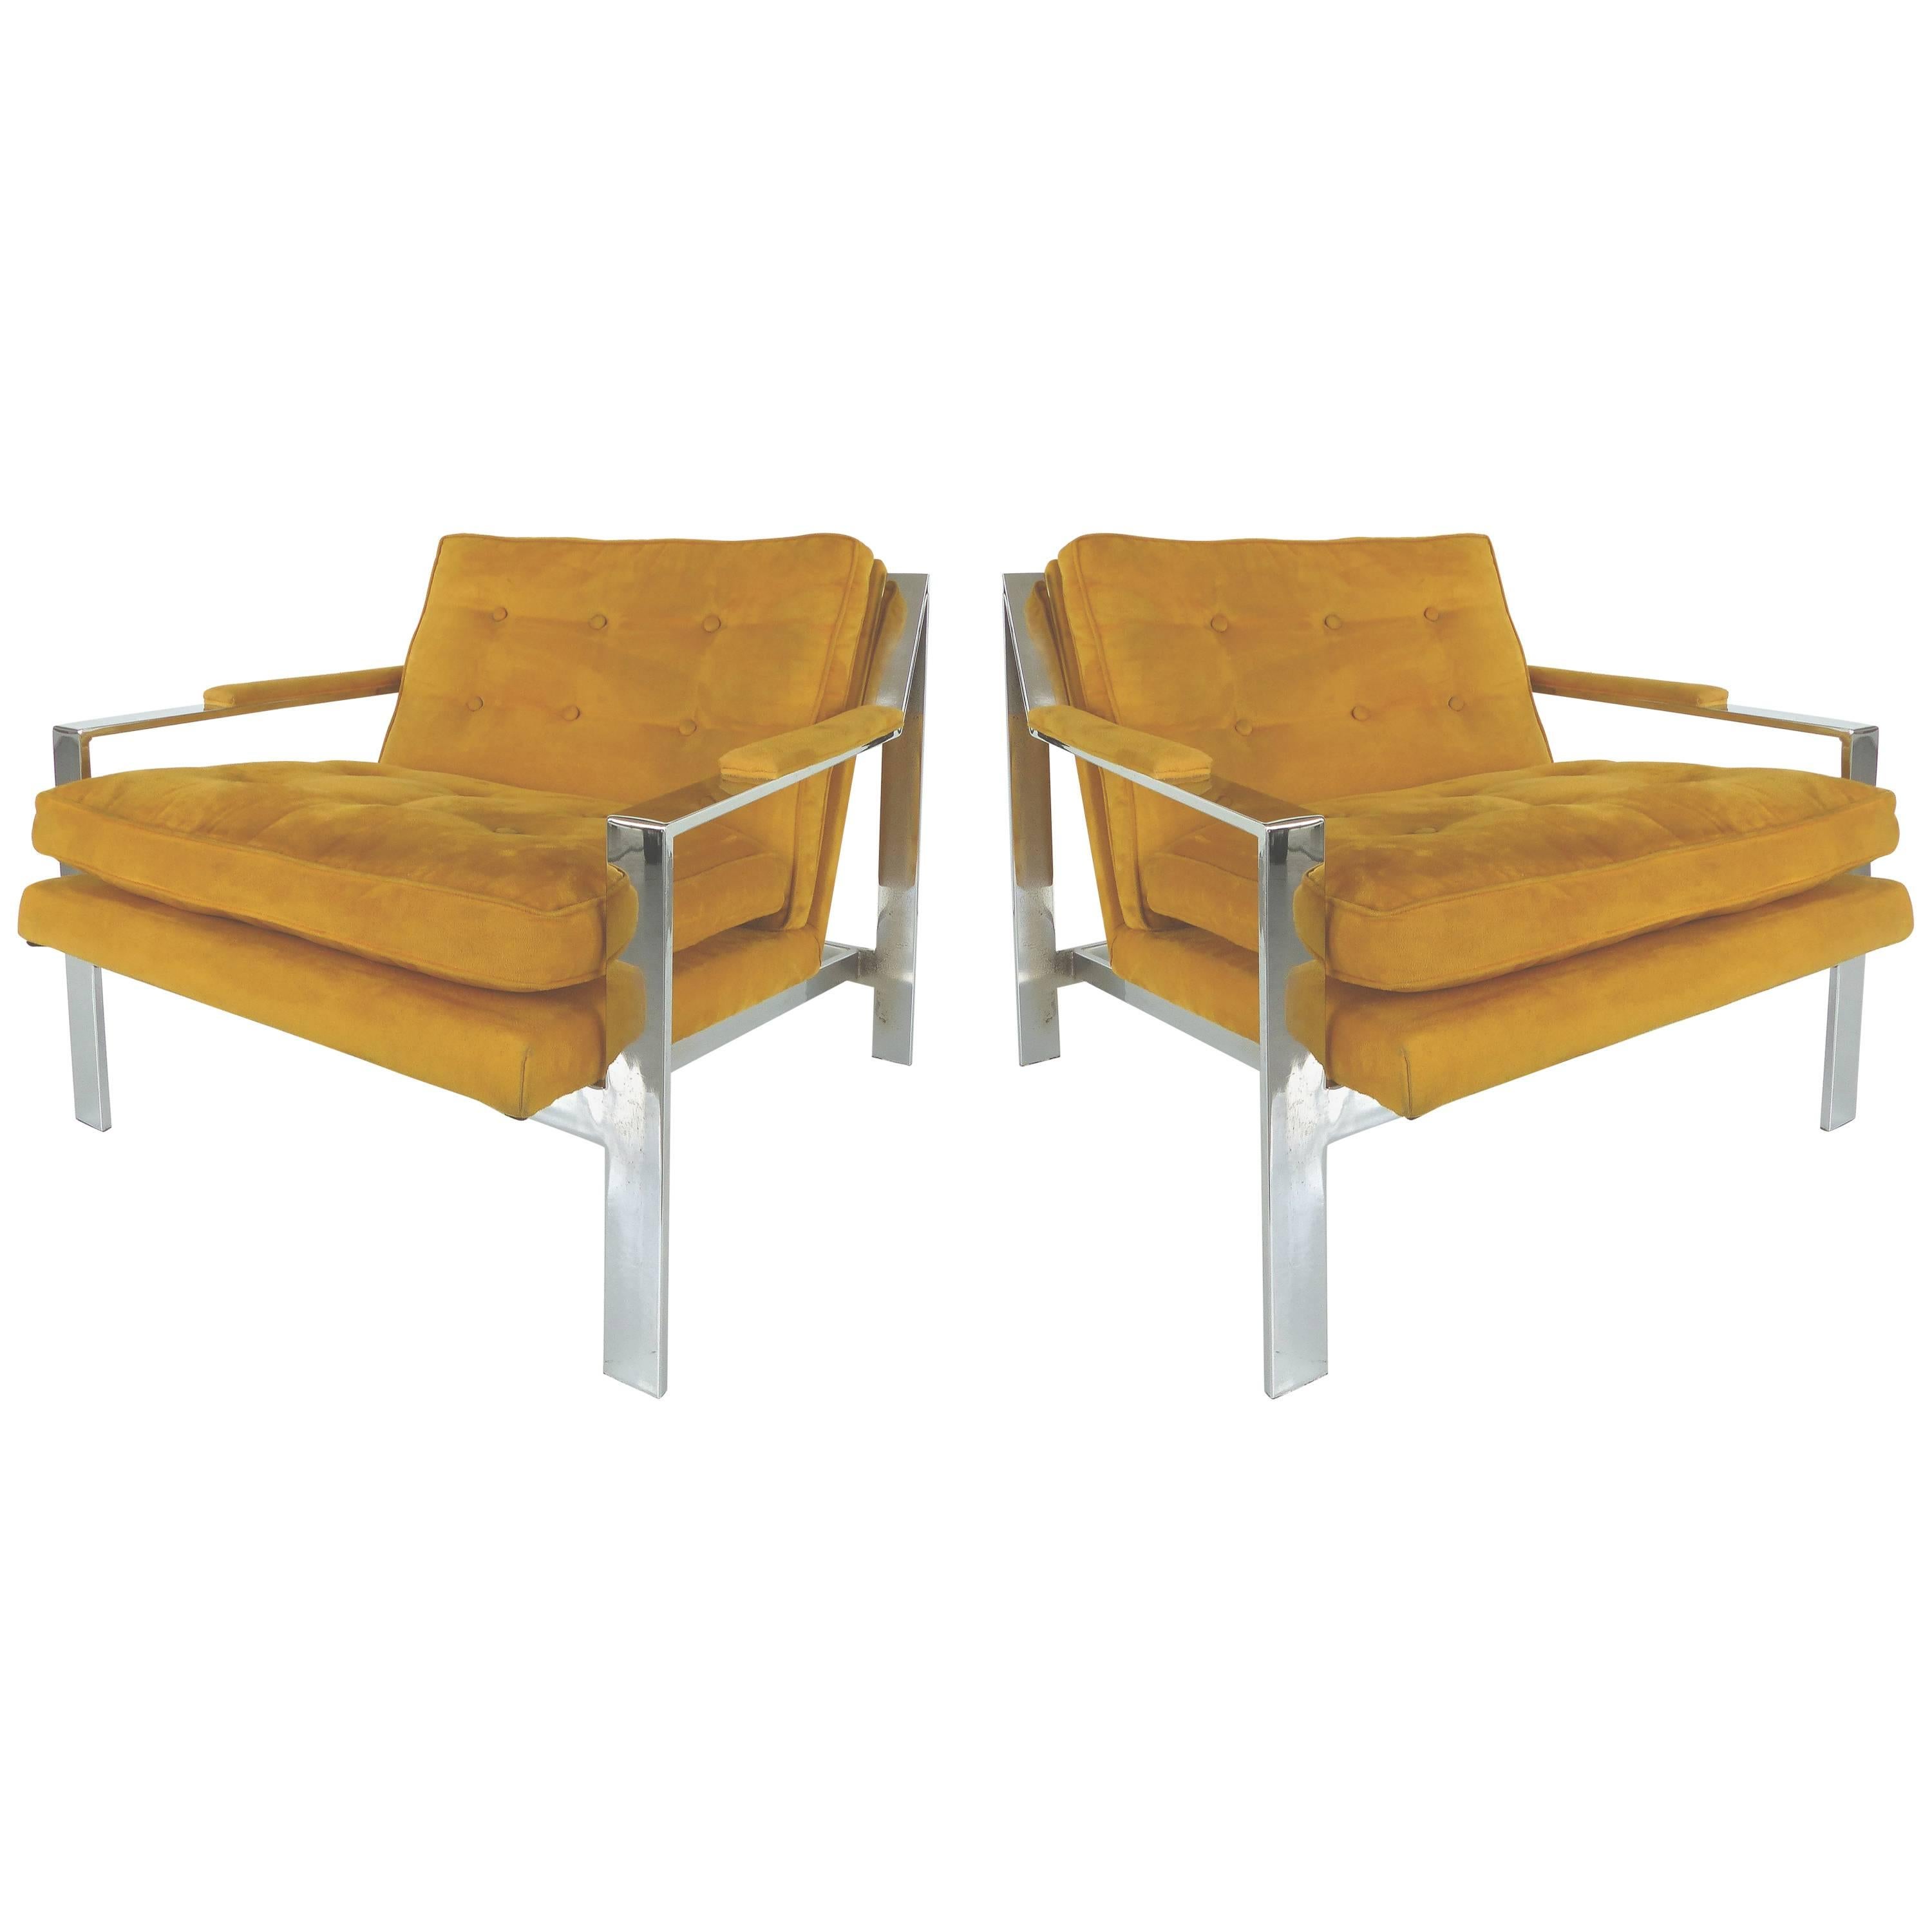 Pair of Mid-Century Modern Chrome Chairs By Cy Mann